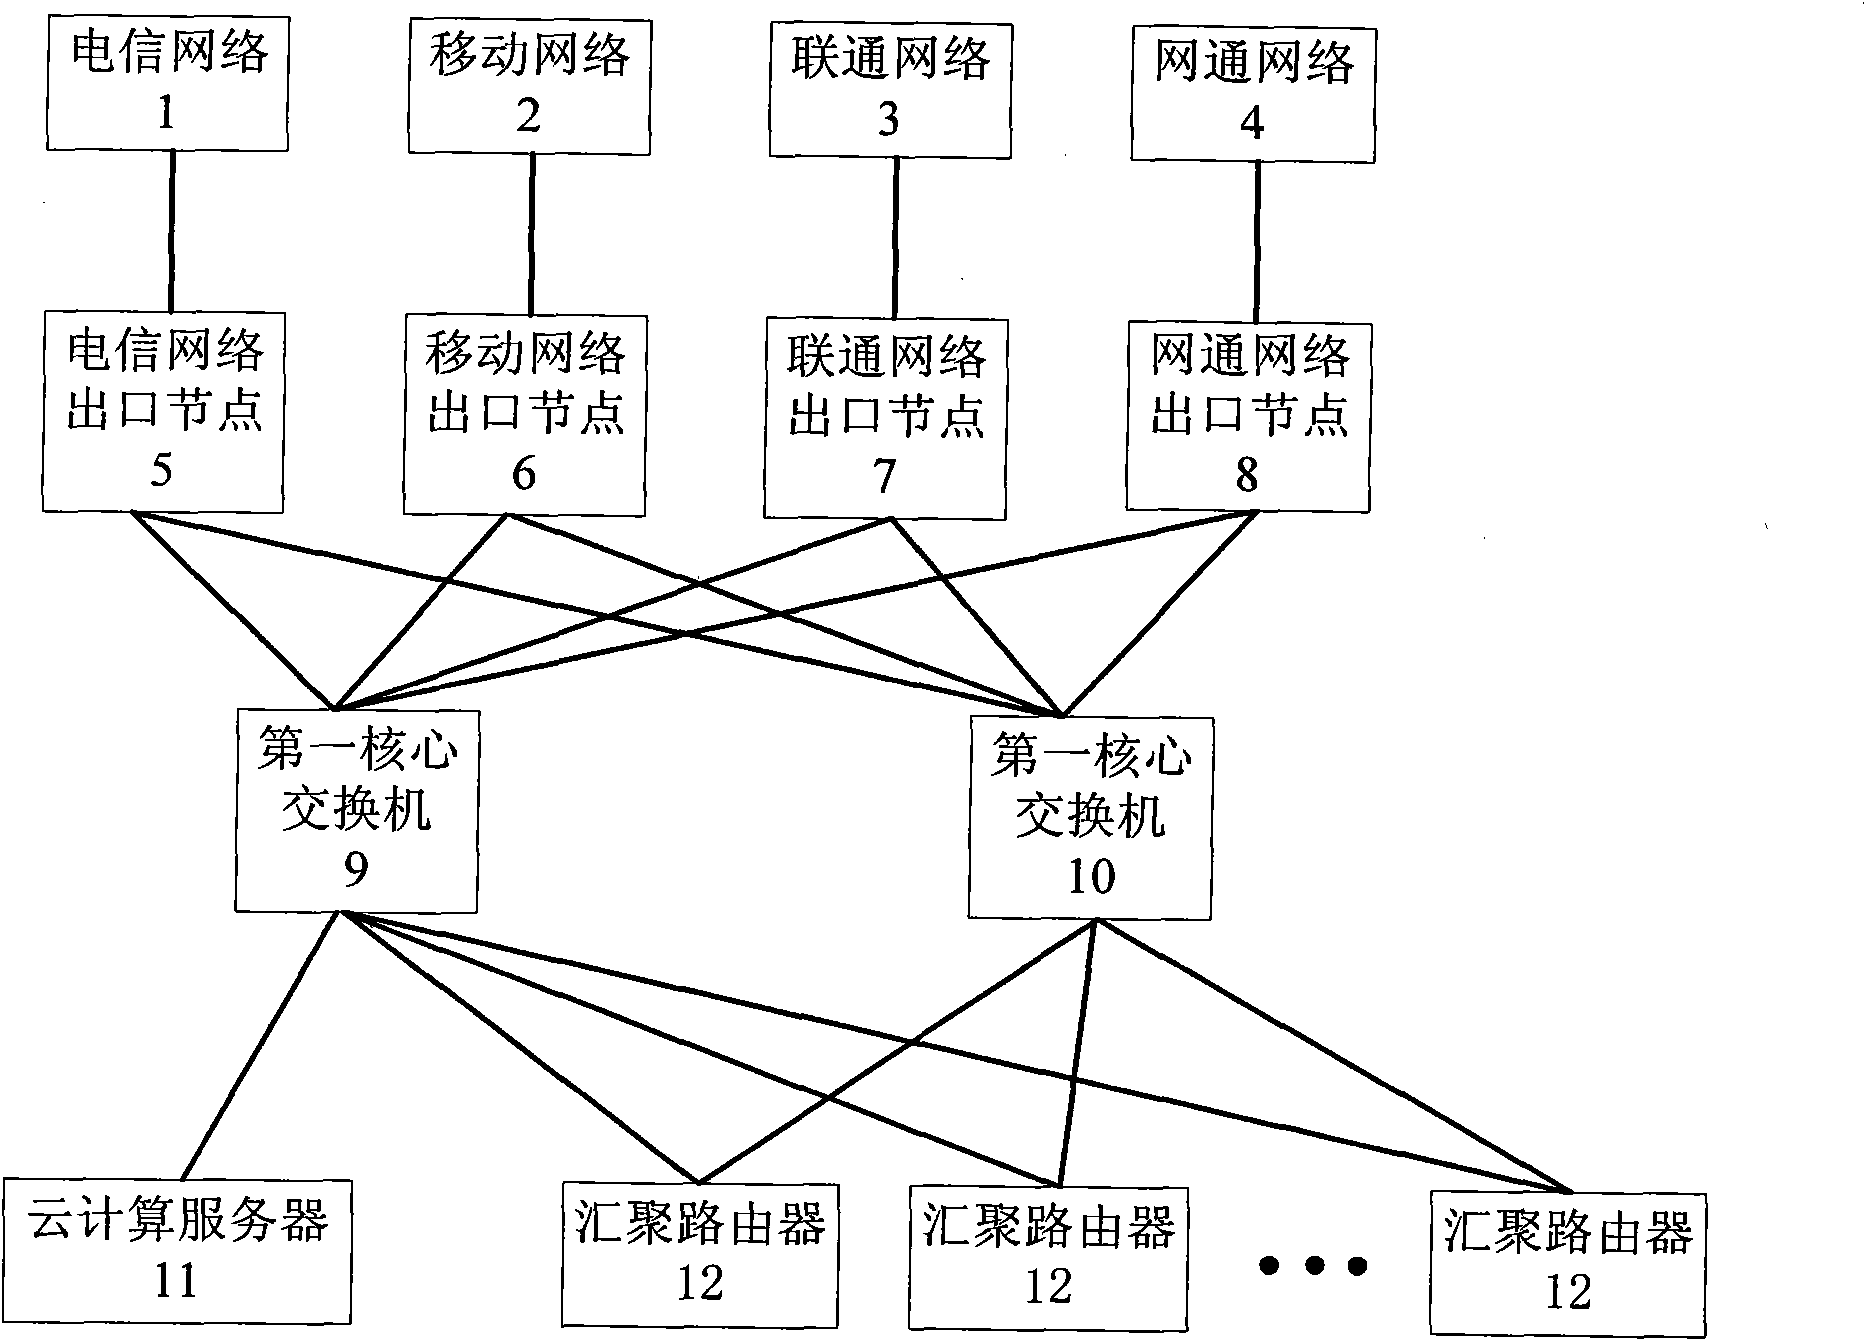 Four-network interconnection control system